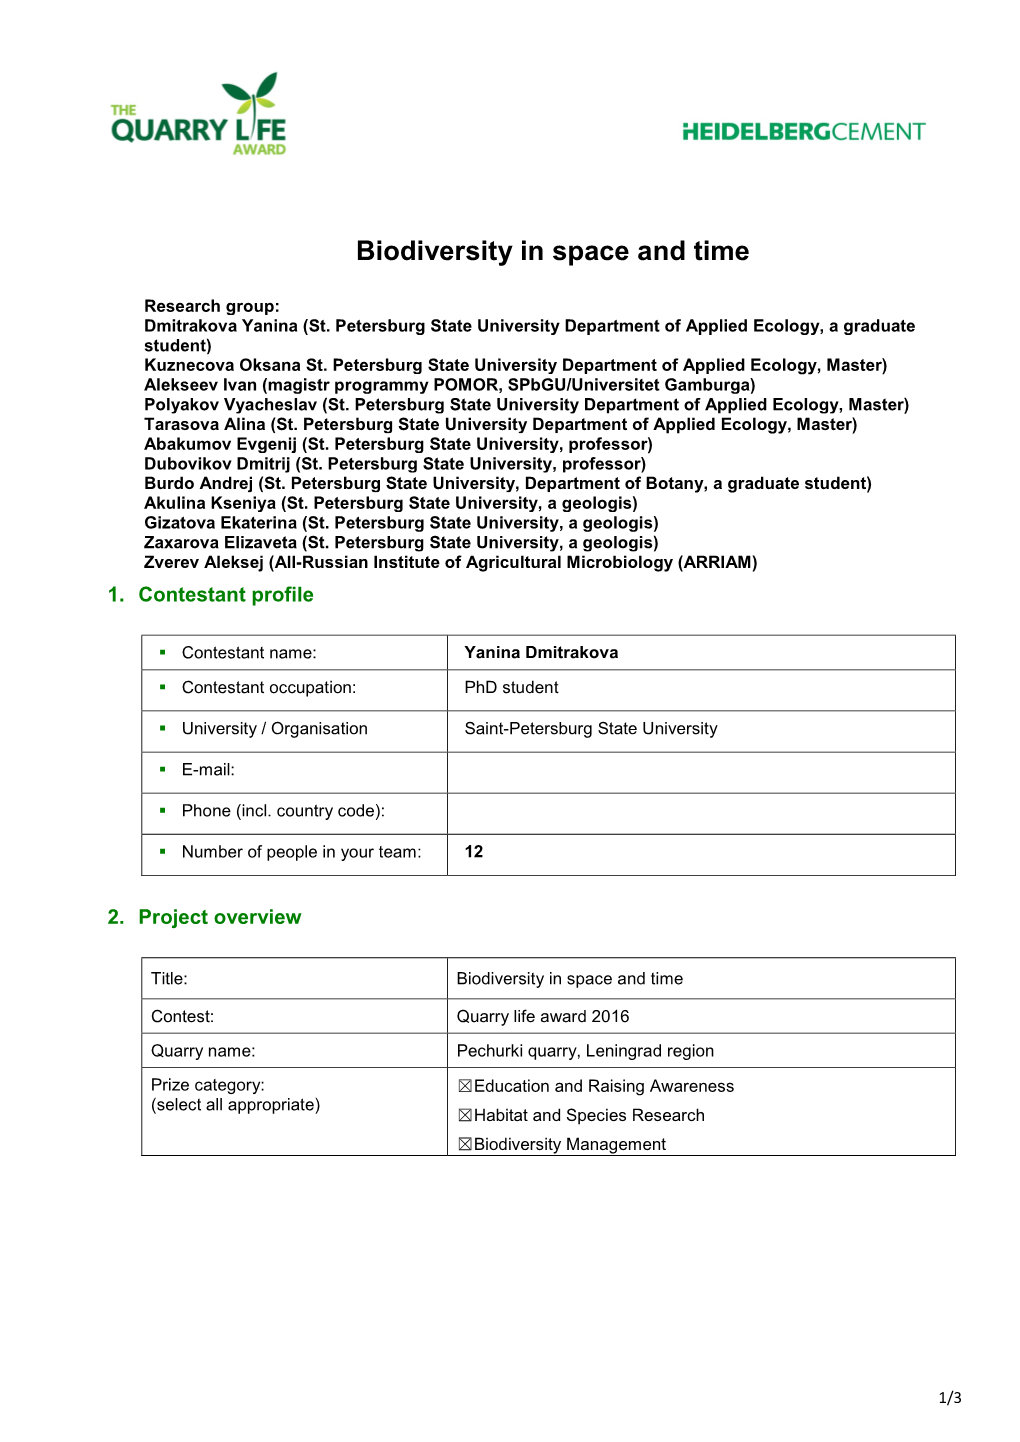 Biodiversity in Space and Time